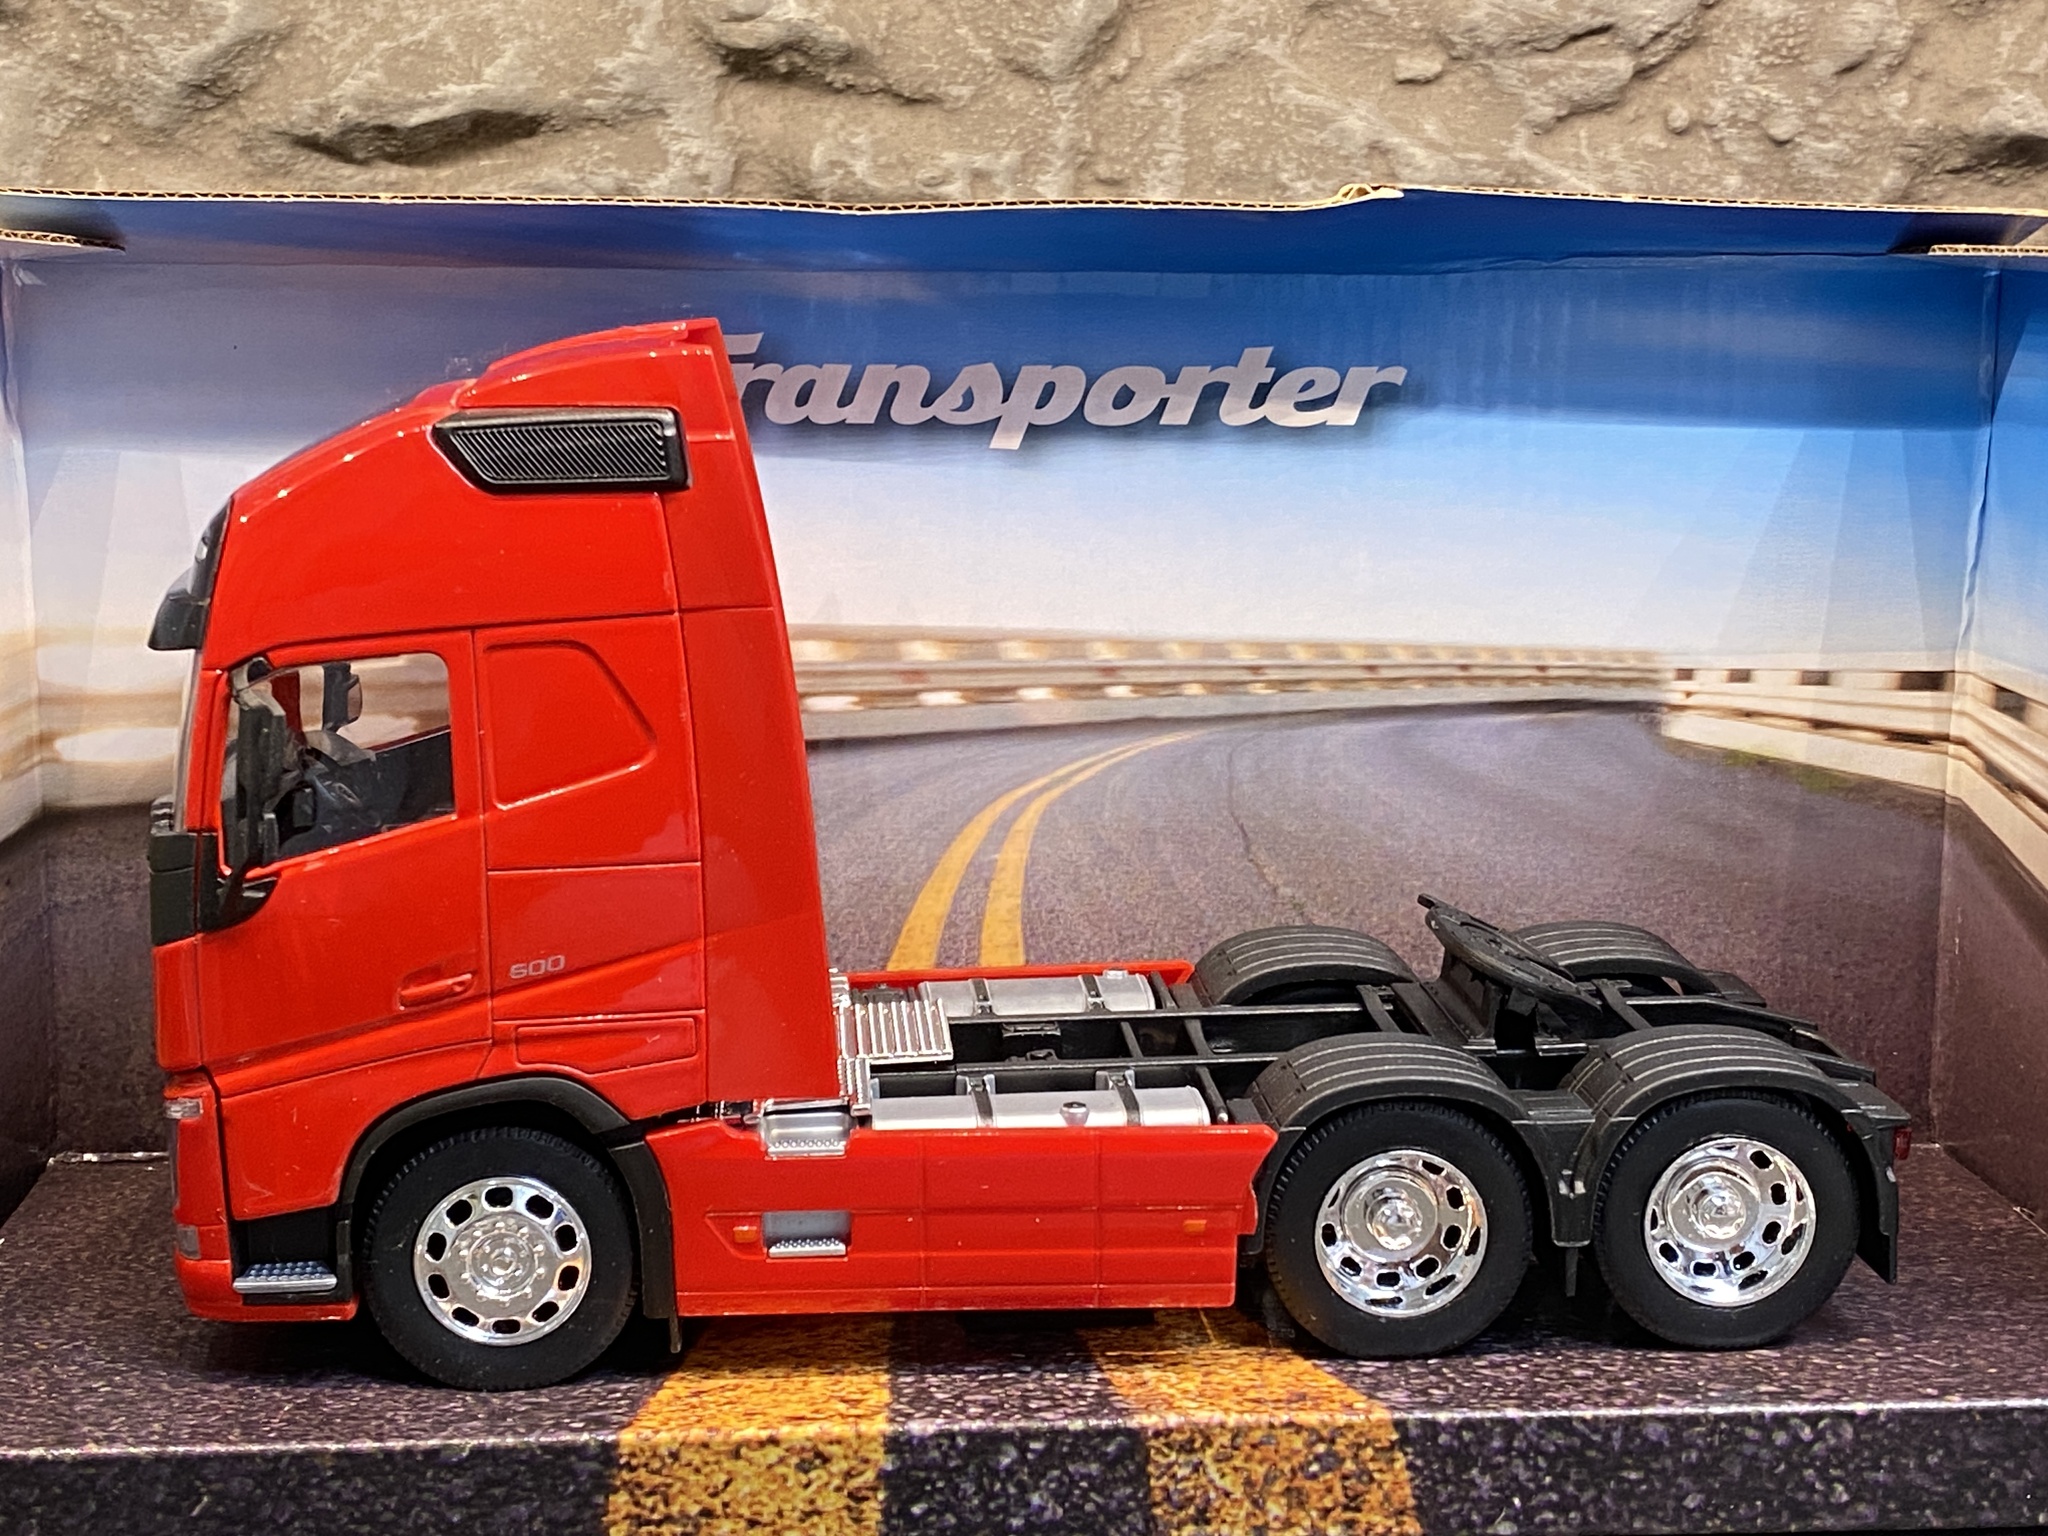 Skala 1/32 WELLY Transporter VOLVO FH Red 6x4